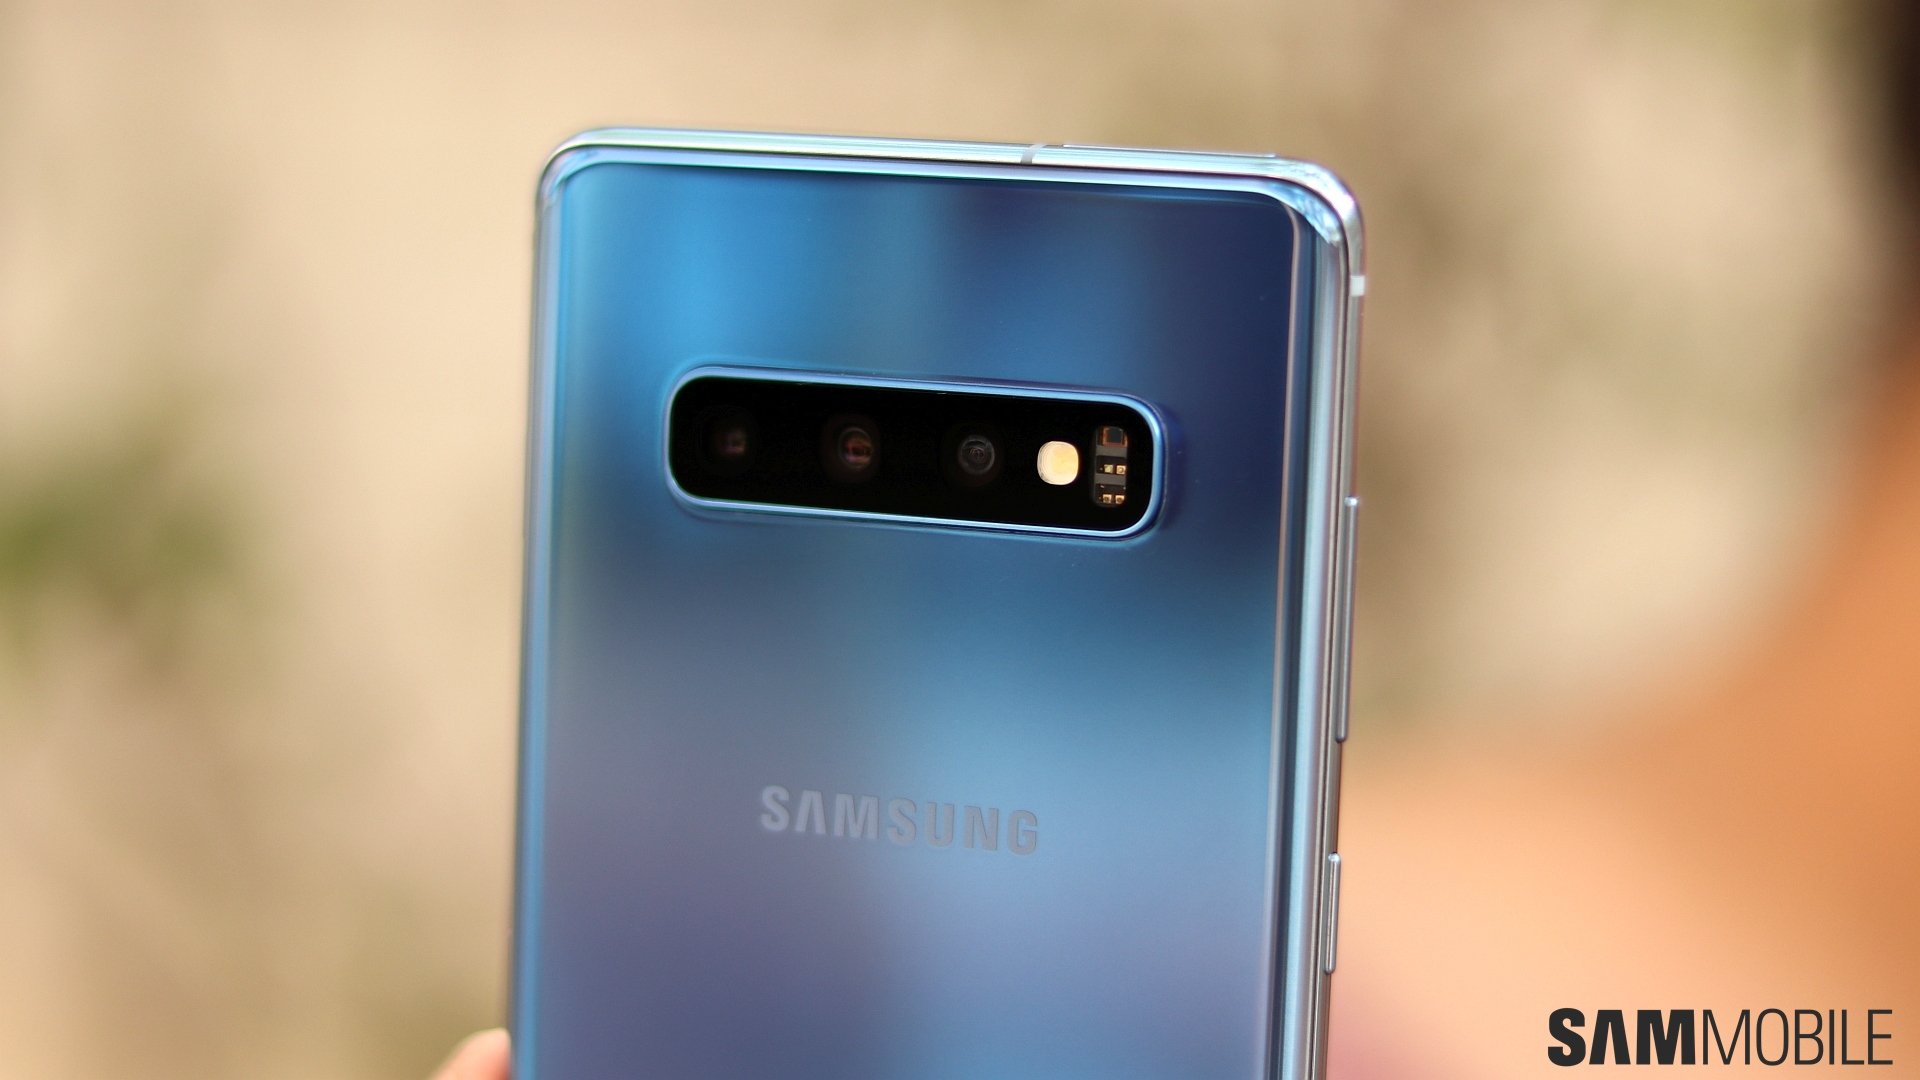 Samsung Cuts Galaxy S10 Price In Pakistan A Month After - samsung new models 2019 in pakistan